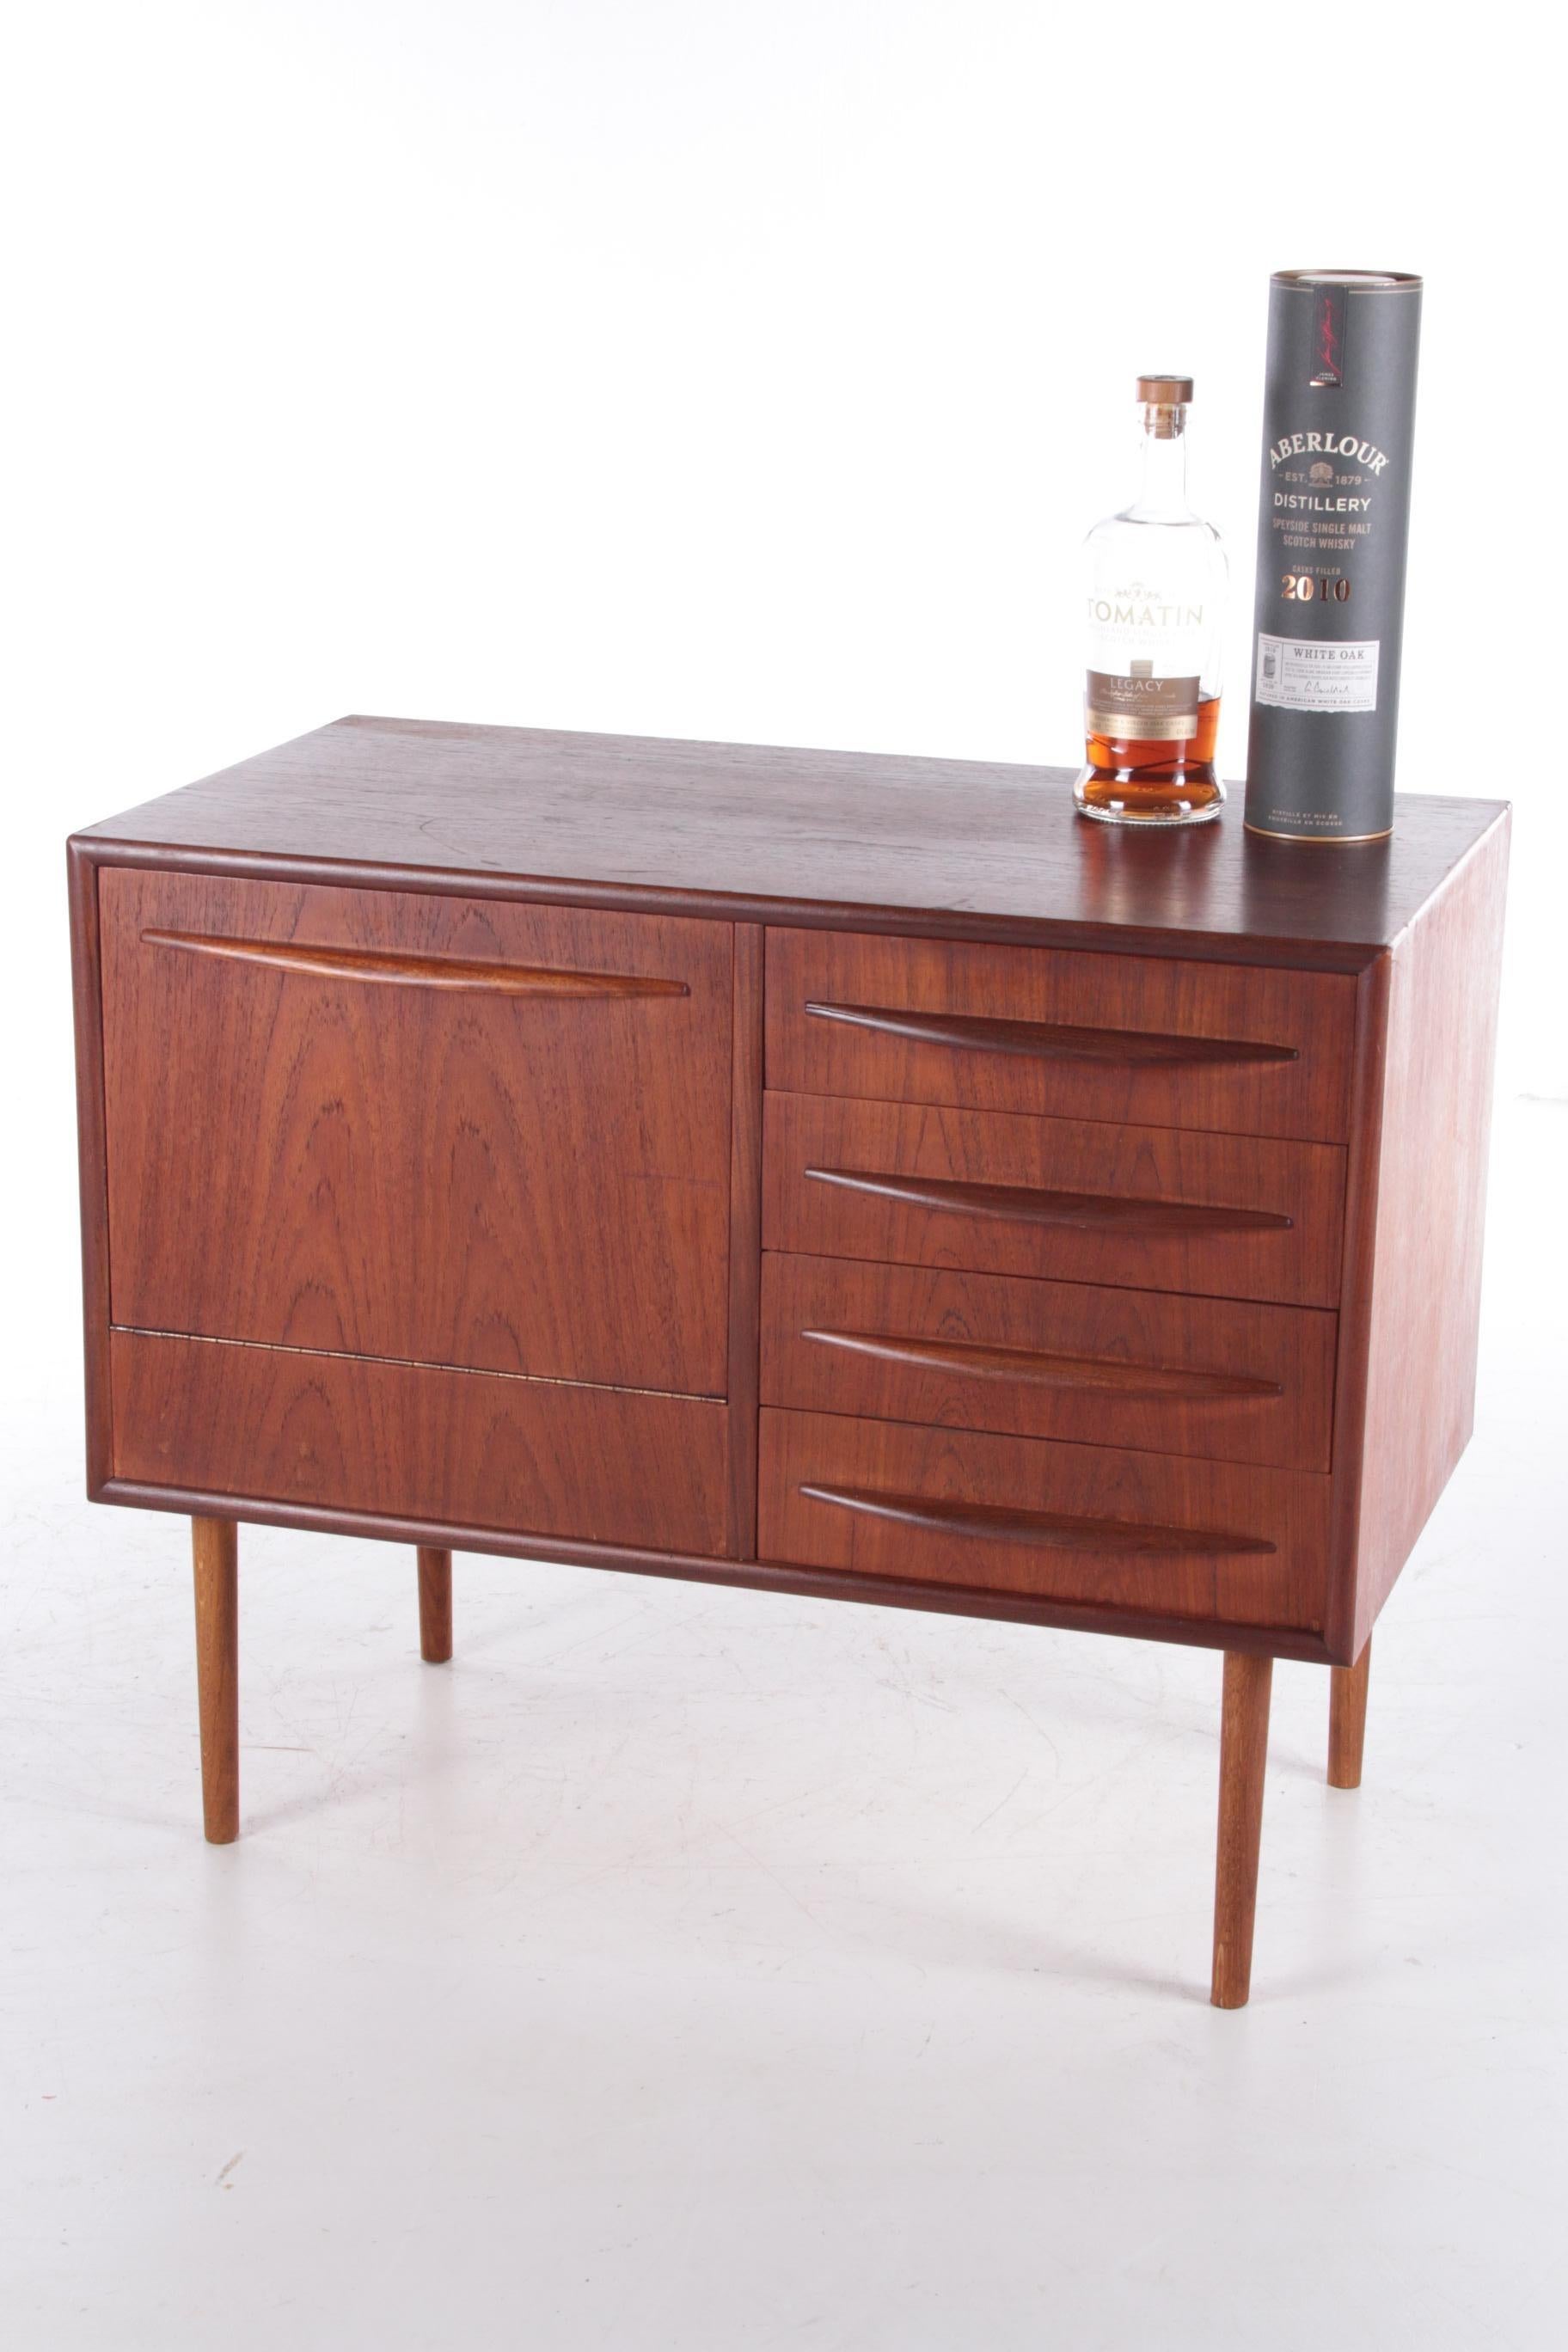 1960s buffet or TV cabinet with 4 drawers in teak Danish.

This cabinet has 4 drawers and a flap on the left, this has been a TV cabinet and could serve for years to come.

Also nice to use as a drinks bar, the glassware can also easily be